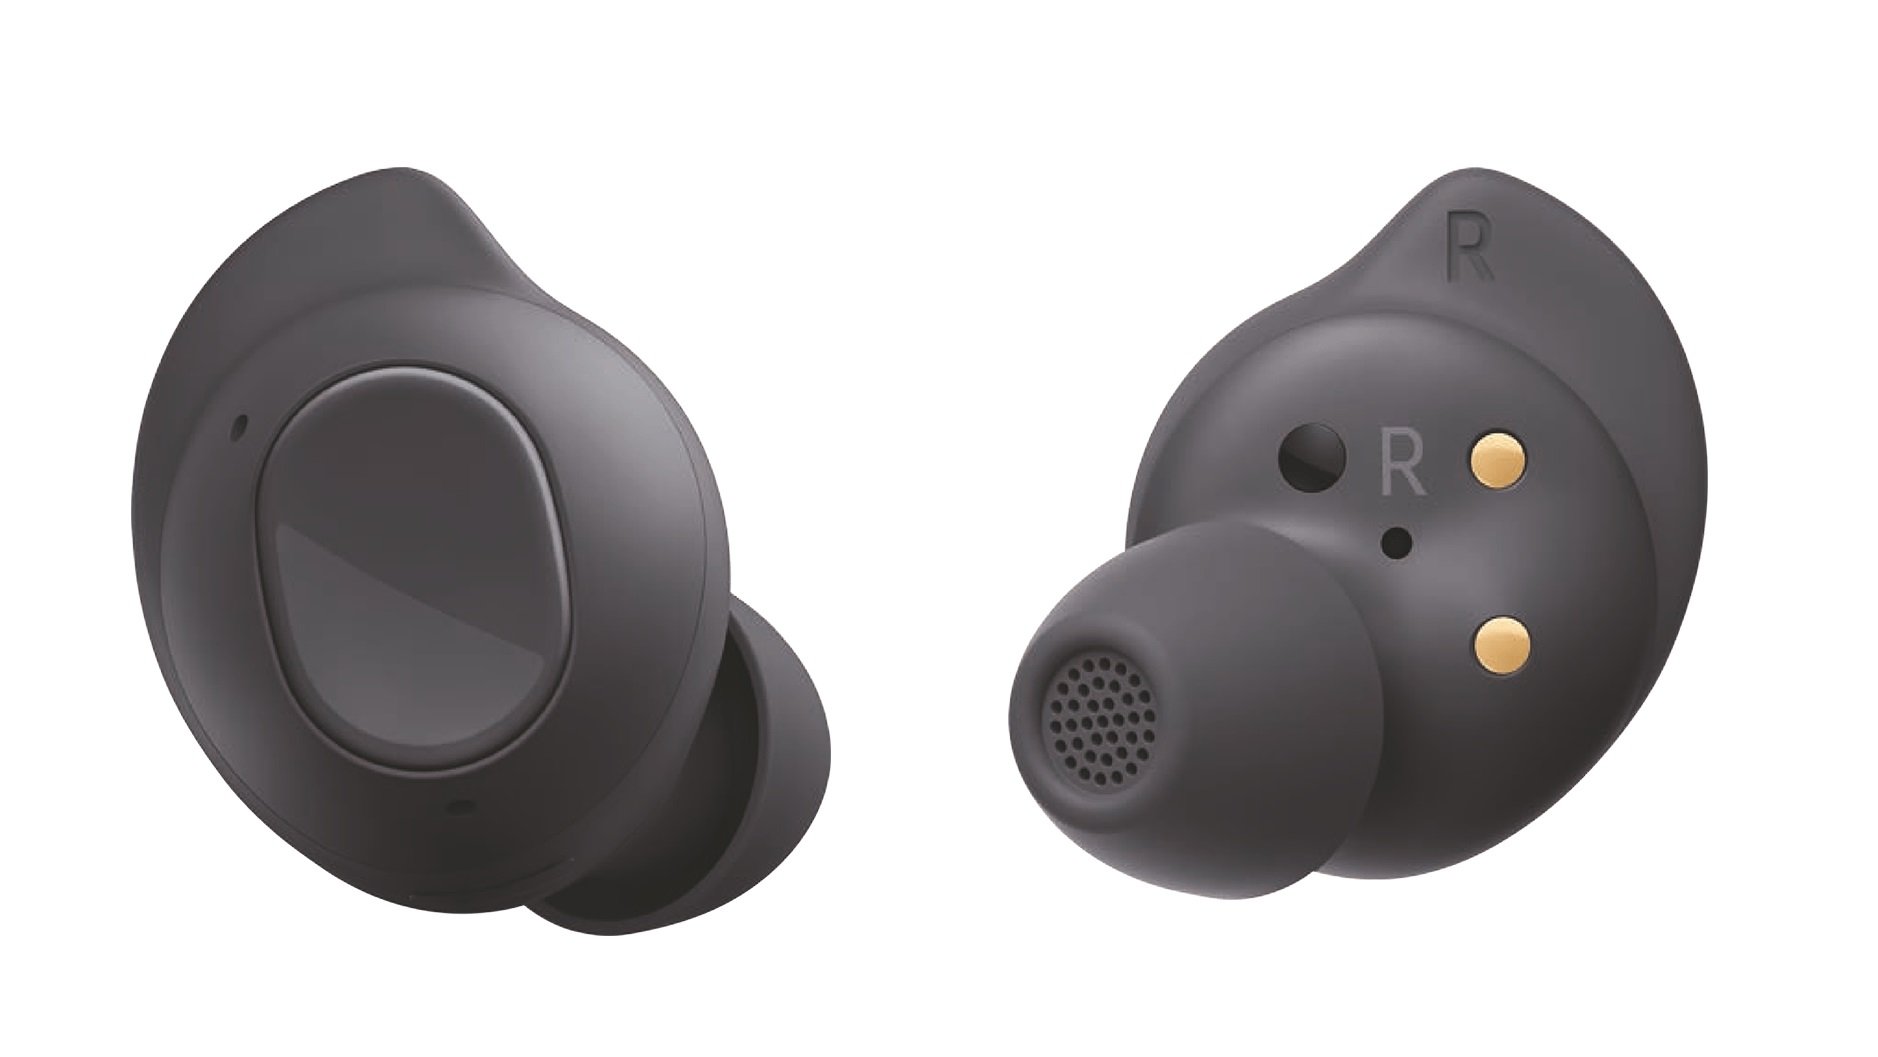 New renders offer a better look at the upcoming Galaxy Buds FE - SamMobile